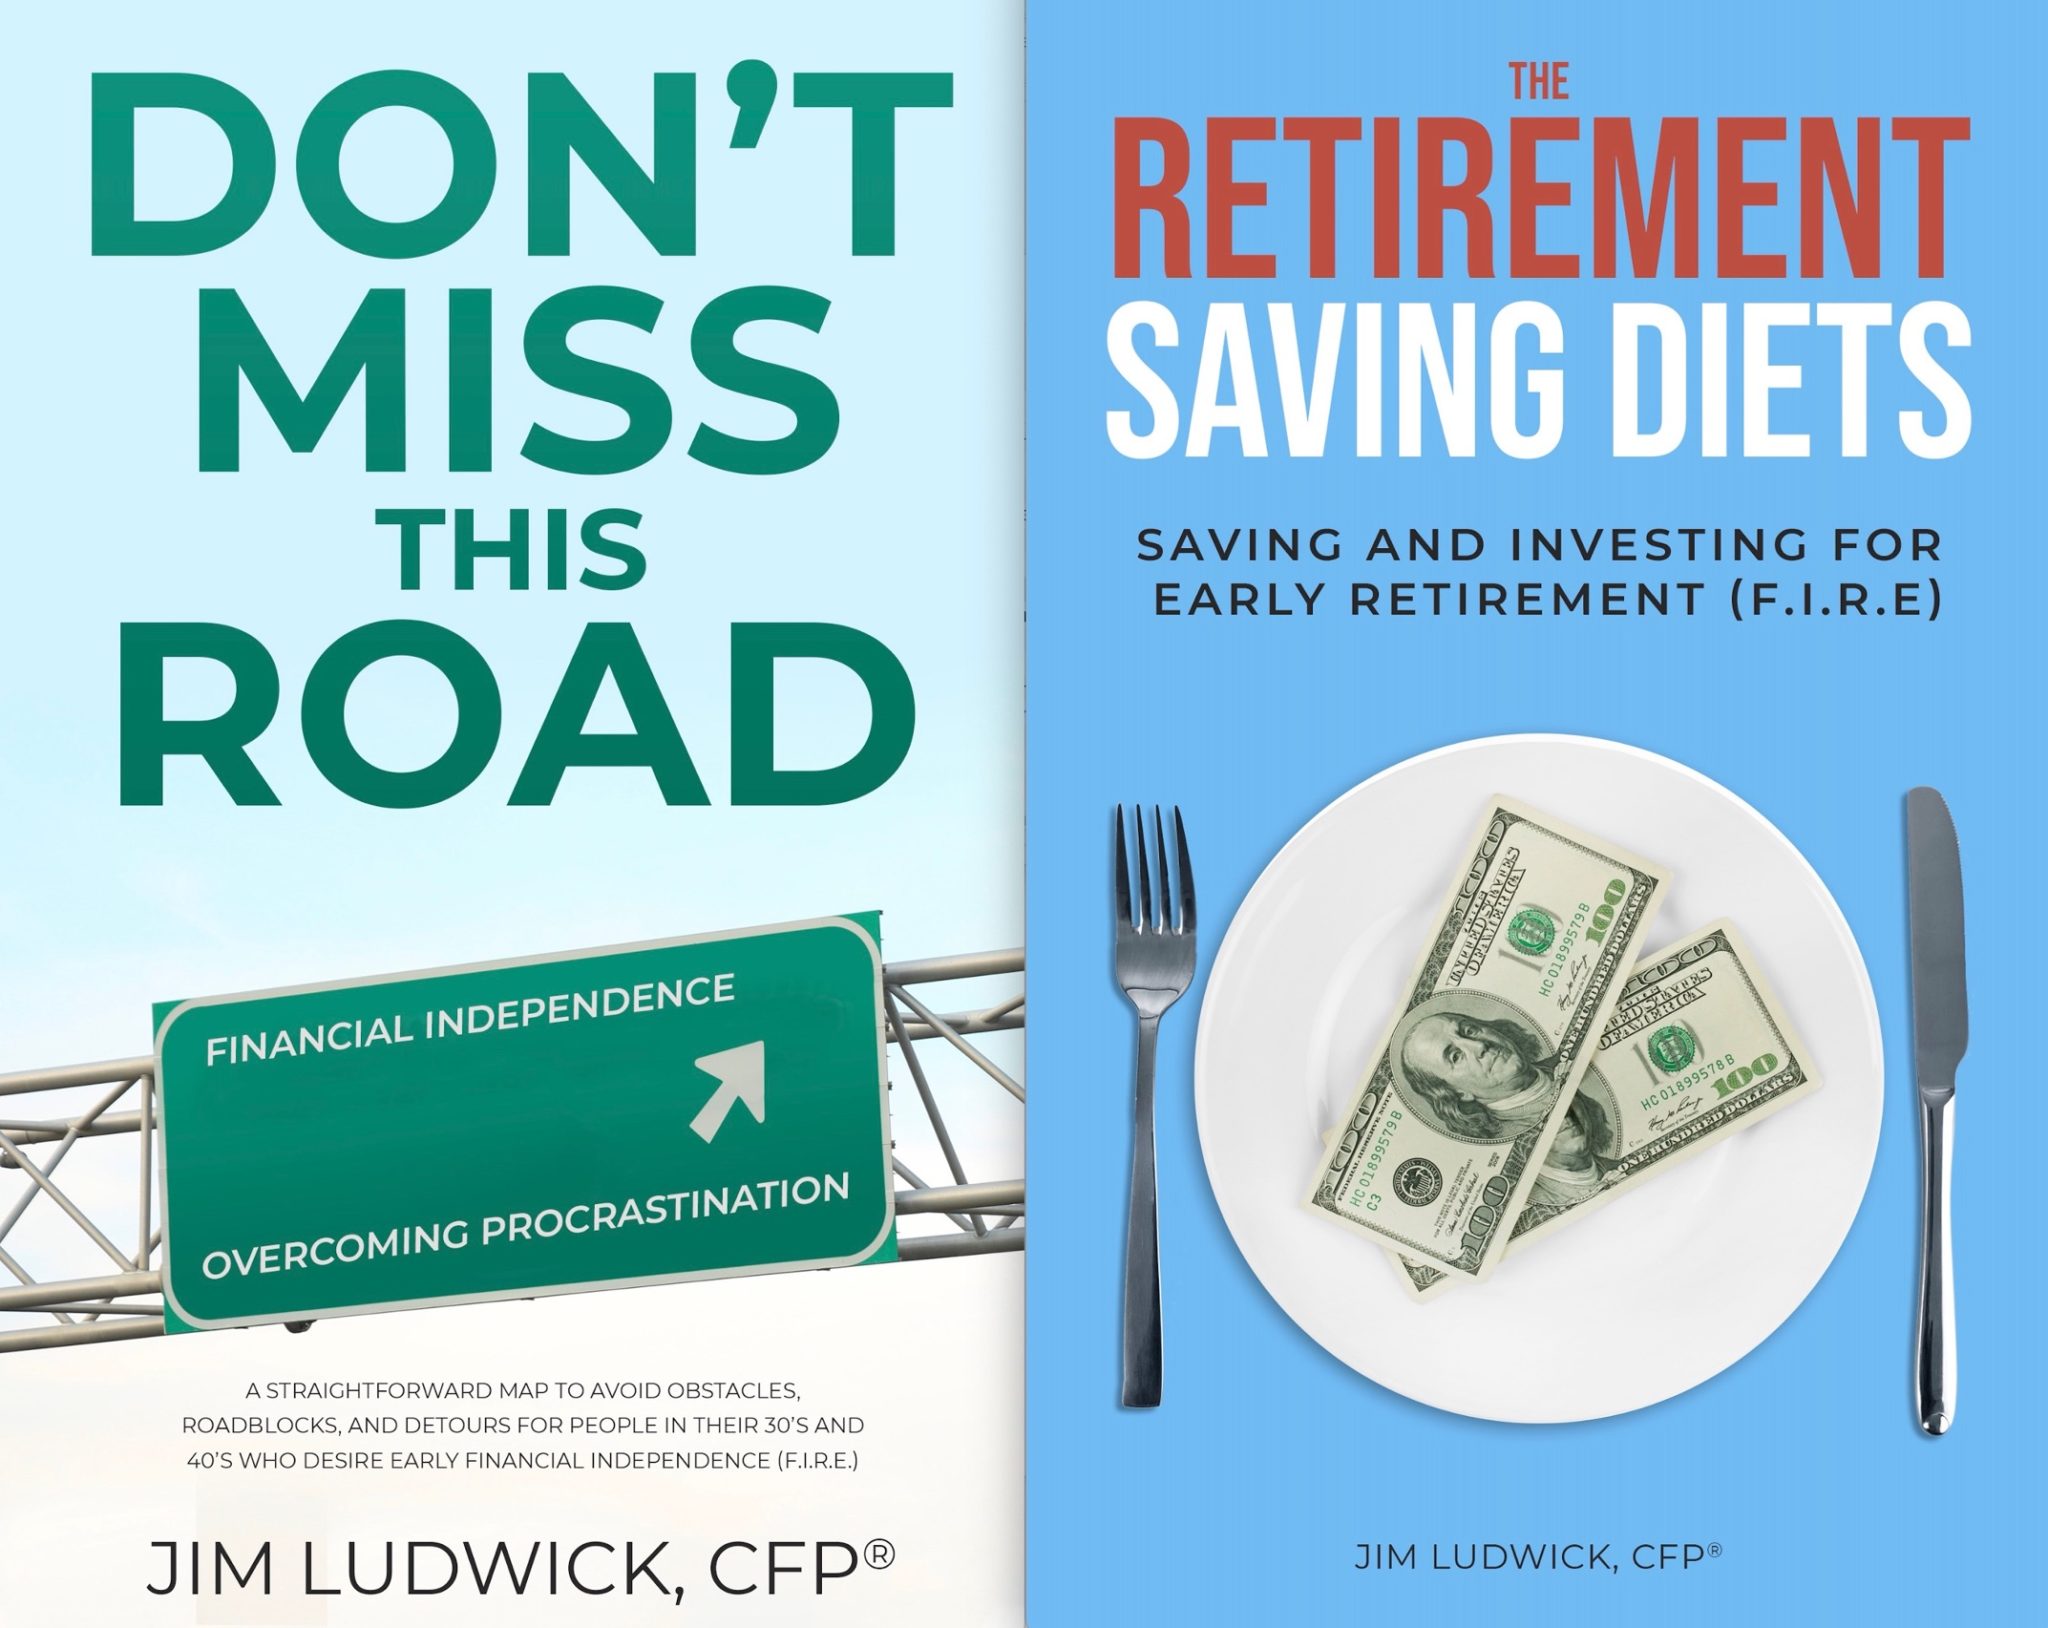 Books by our own Jim Ludwick!